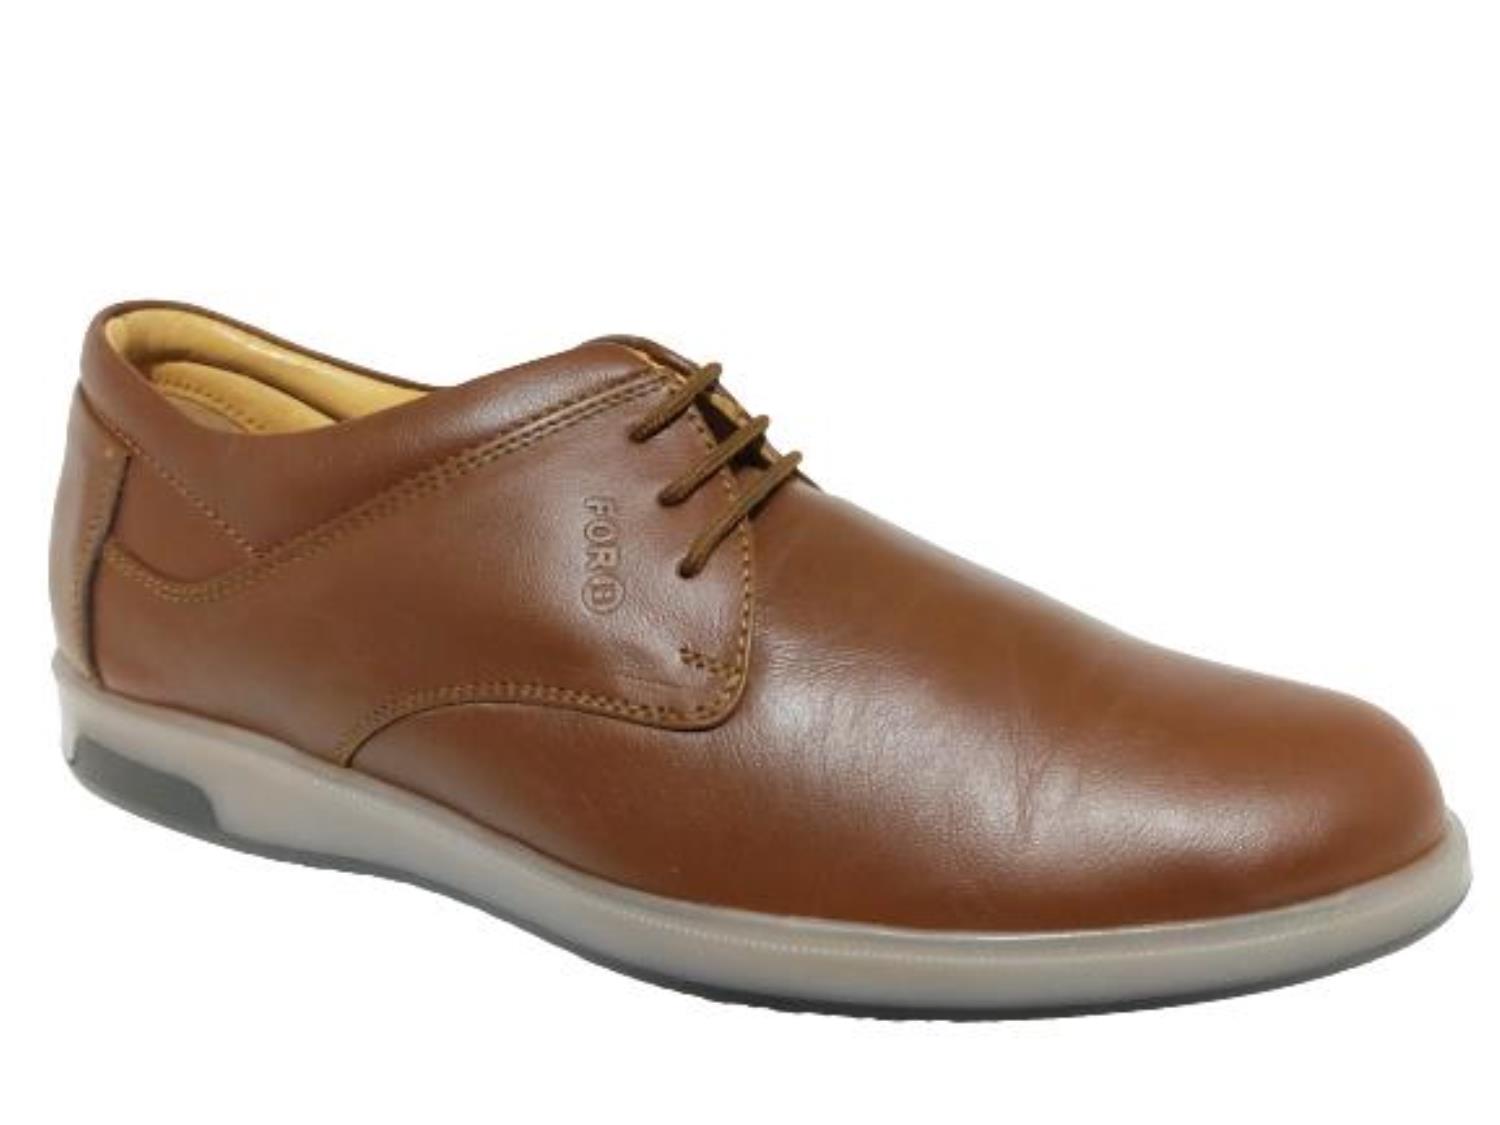 For B Brand Men's F1F1 Laced Casual Formal Shoes (Tan) :: RAJASHOES